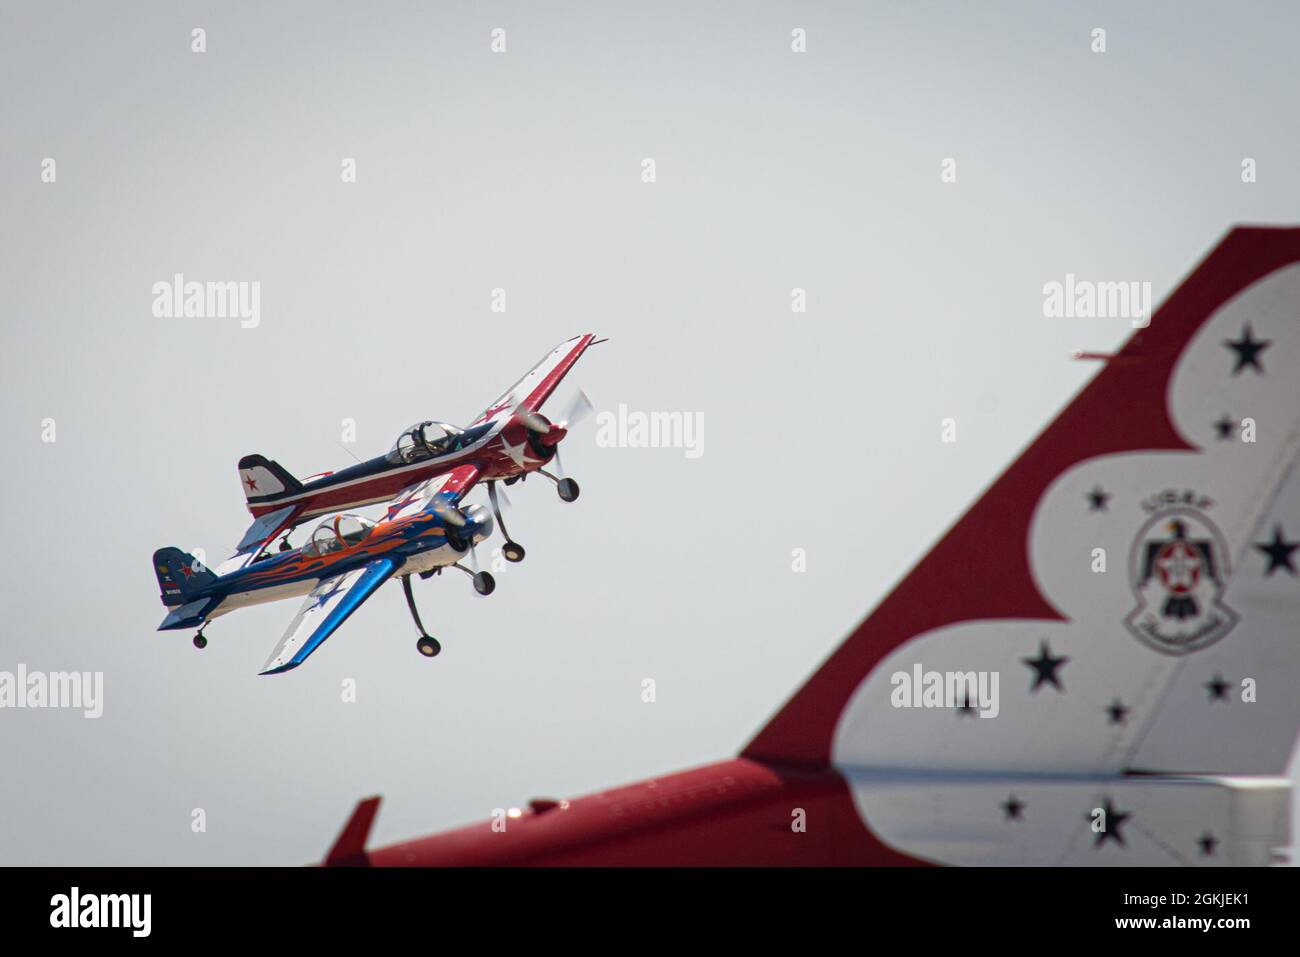 The YAK-110 aircraft piloted by Jeff Boerboon flies above an airstrip during the Speed of Sound Airshow at Rosecrans Memorial Airport in St. Joseph, Missouri, May 1, 2021. The Yak-110 is two Yak-55 aircraft connected together with a J-85 jet engine welded to the bottom. The air show was hosted by the 139th Airlift Wing, and city of St. Joseph to thank the community for their support. The air show committee estimated around 30,000 people attended during the weekend performances in which the United States Air Force Thunderbirds Air Demonstration Squadron were featured. Stock Photo